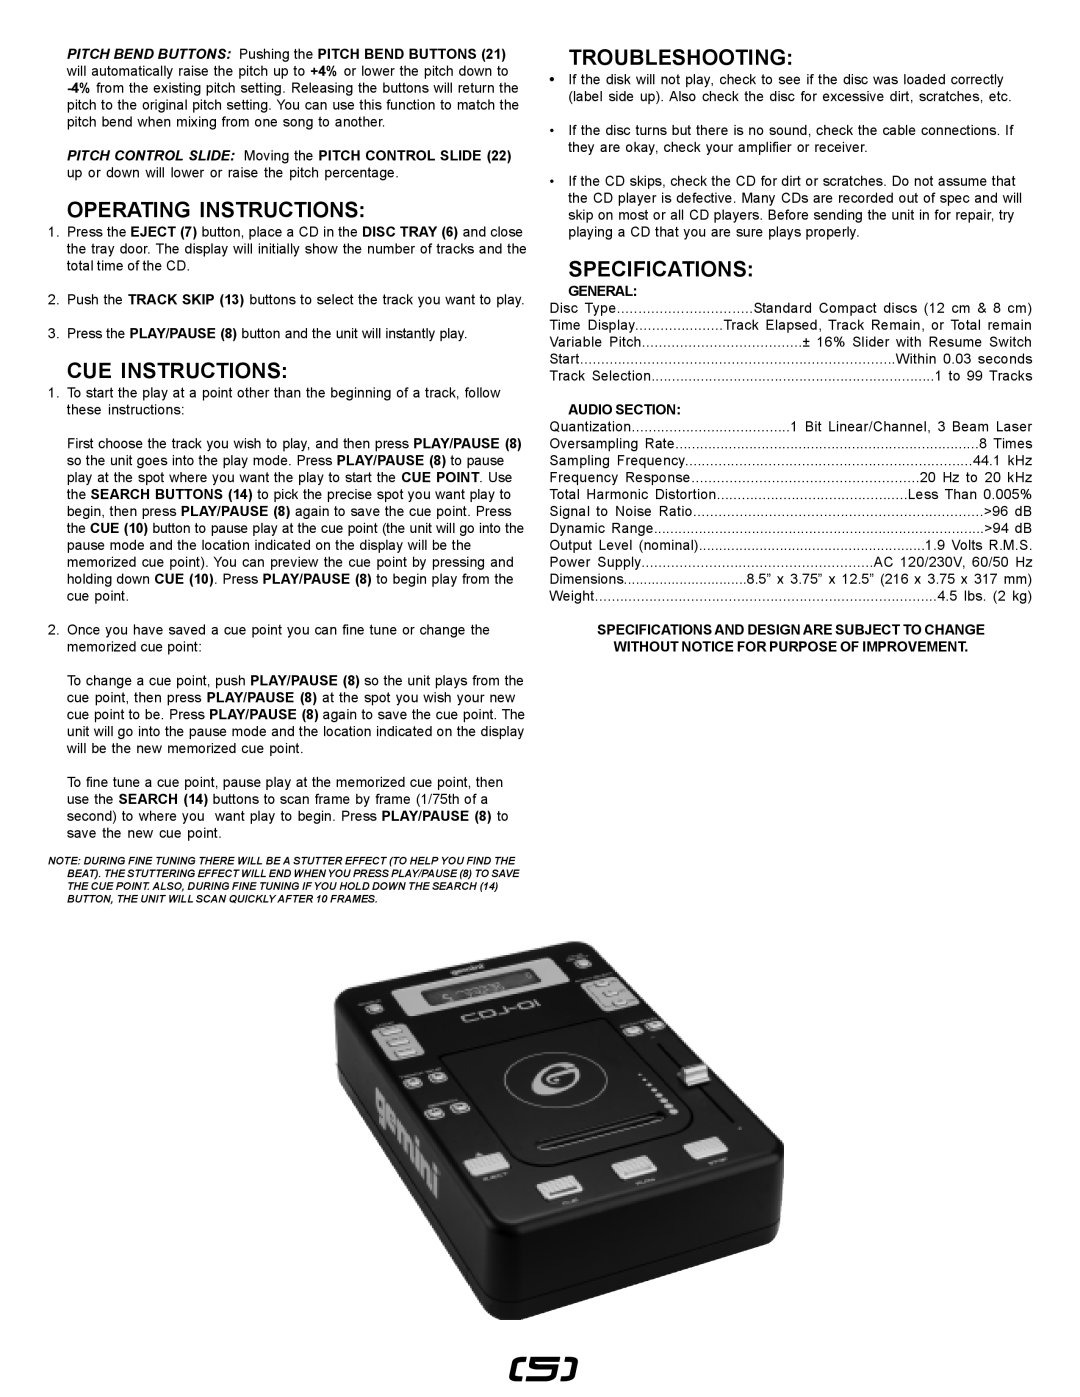 Gemini CDJ-01 manual Operating Instructions, Cue Instructions, Troubleshooting, Specifications, General, Audio Section 